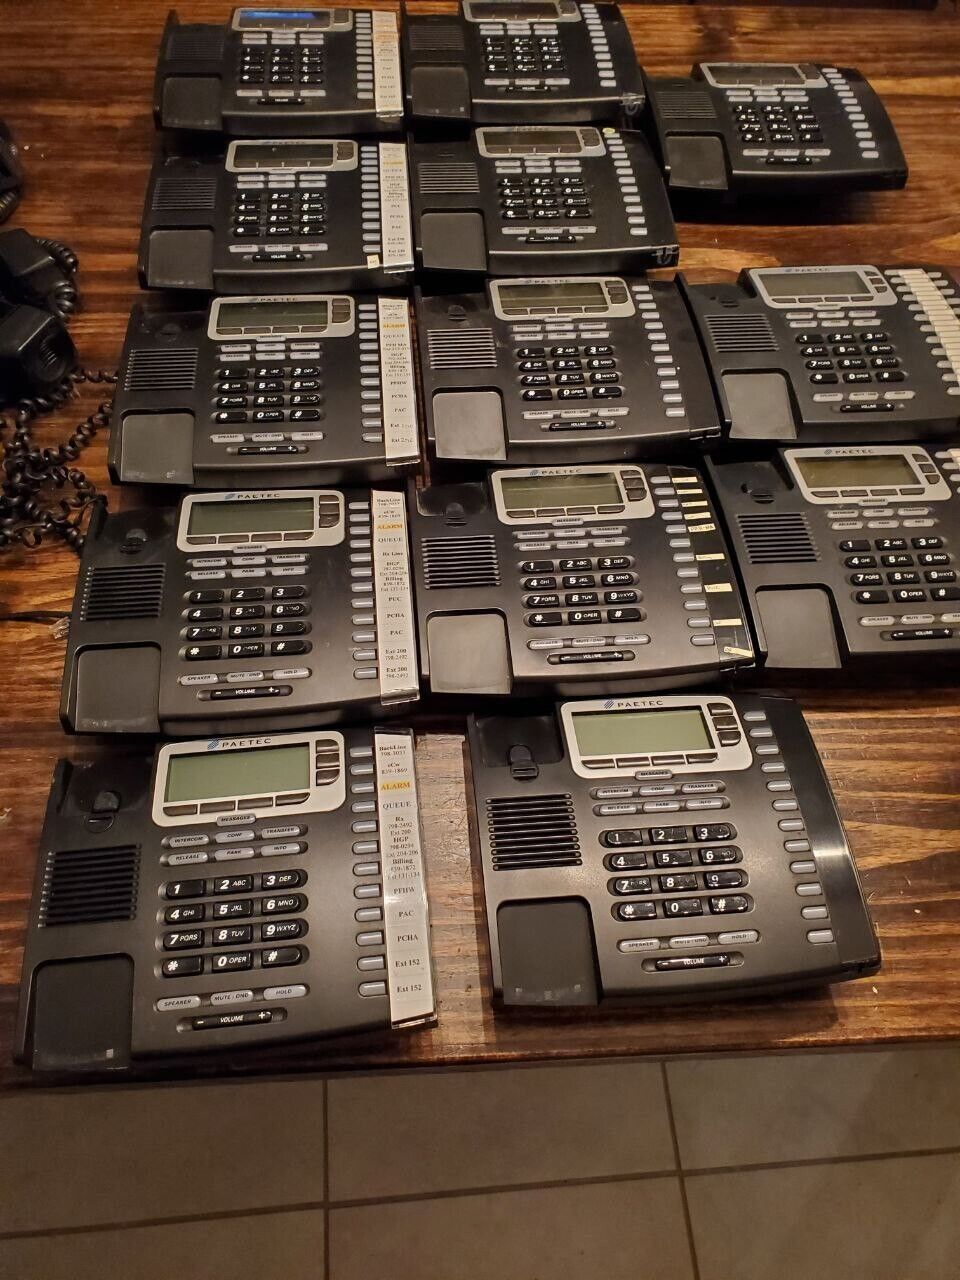 Allworx Paetec 9212P & 9224P Voip Display Phone - LOT OF 13 With Handsets